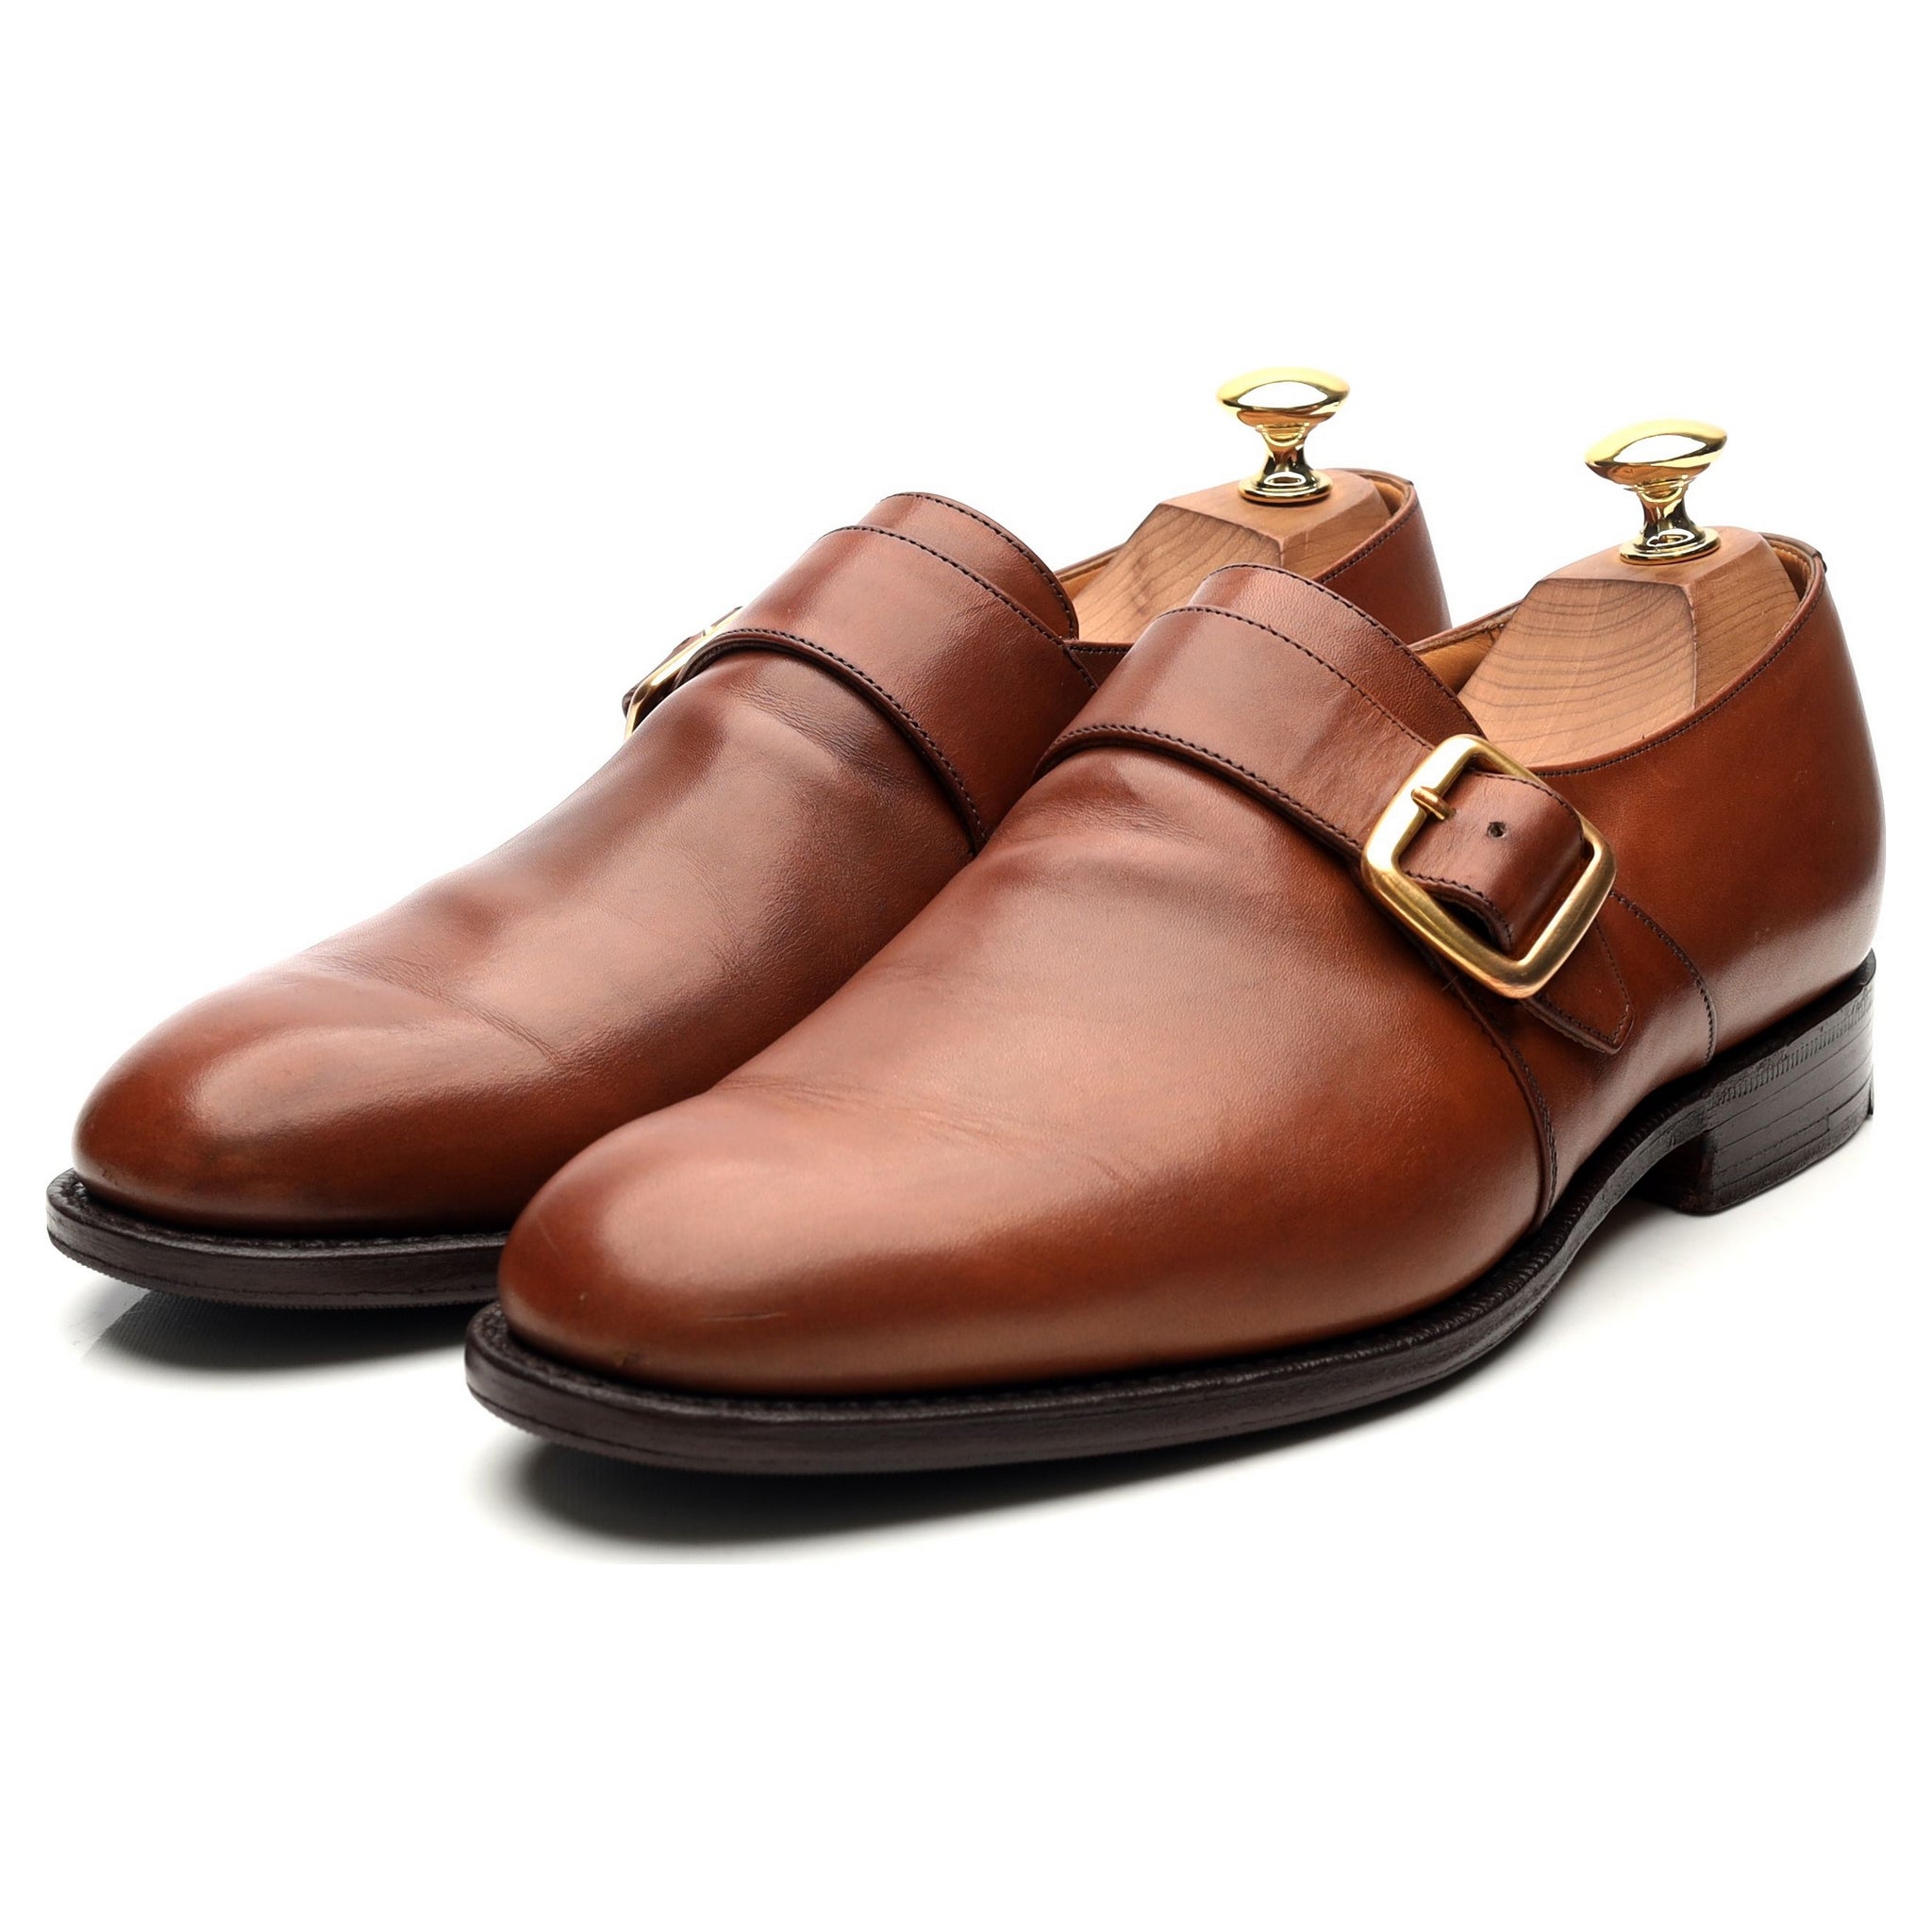 Westbury' Brown Leather Monk Strap UK 6.5 G - Abbot's Shoes